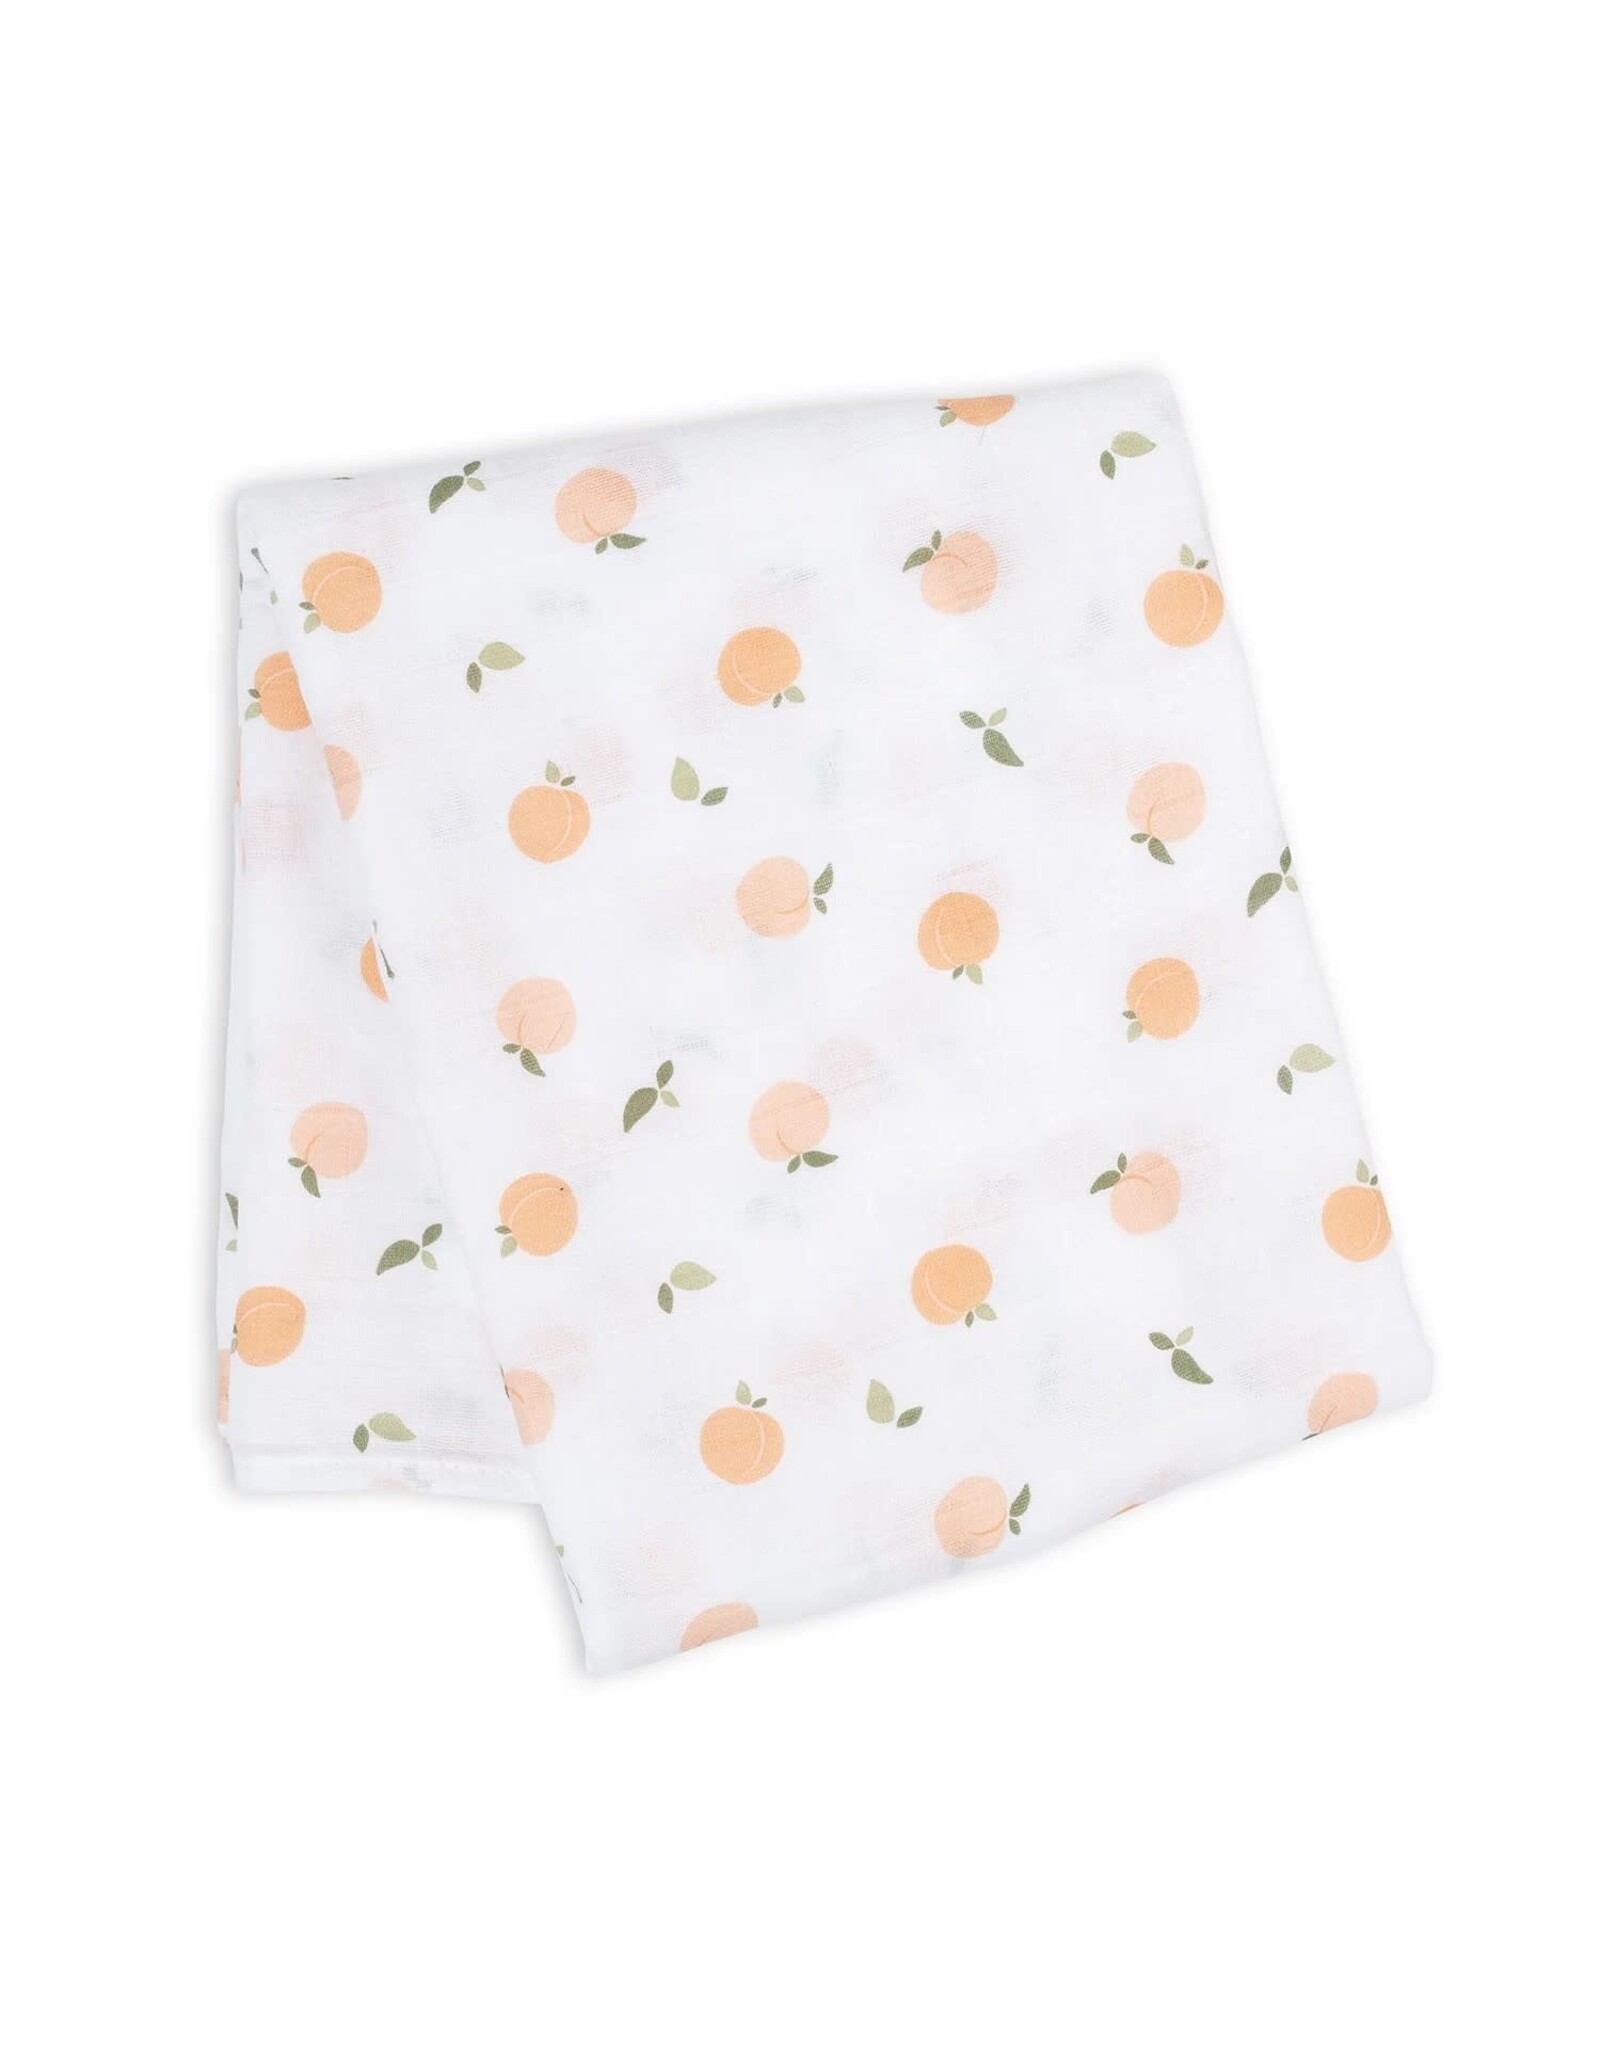 Swaddle Blanket Muslin Cotton LG Peaches